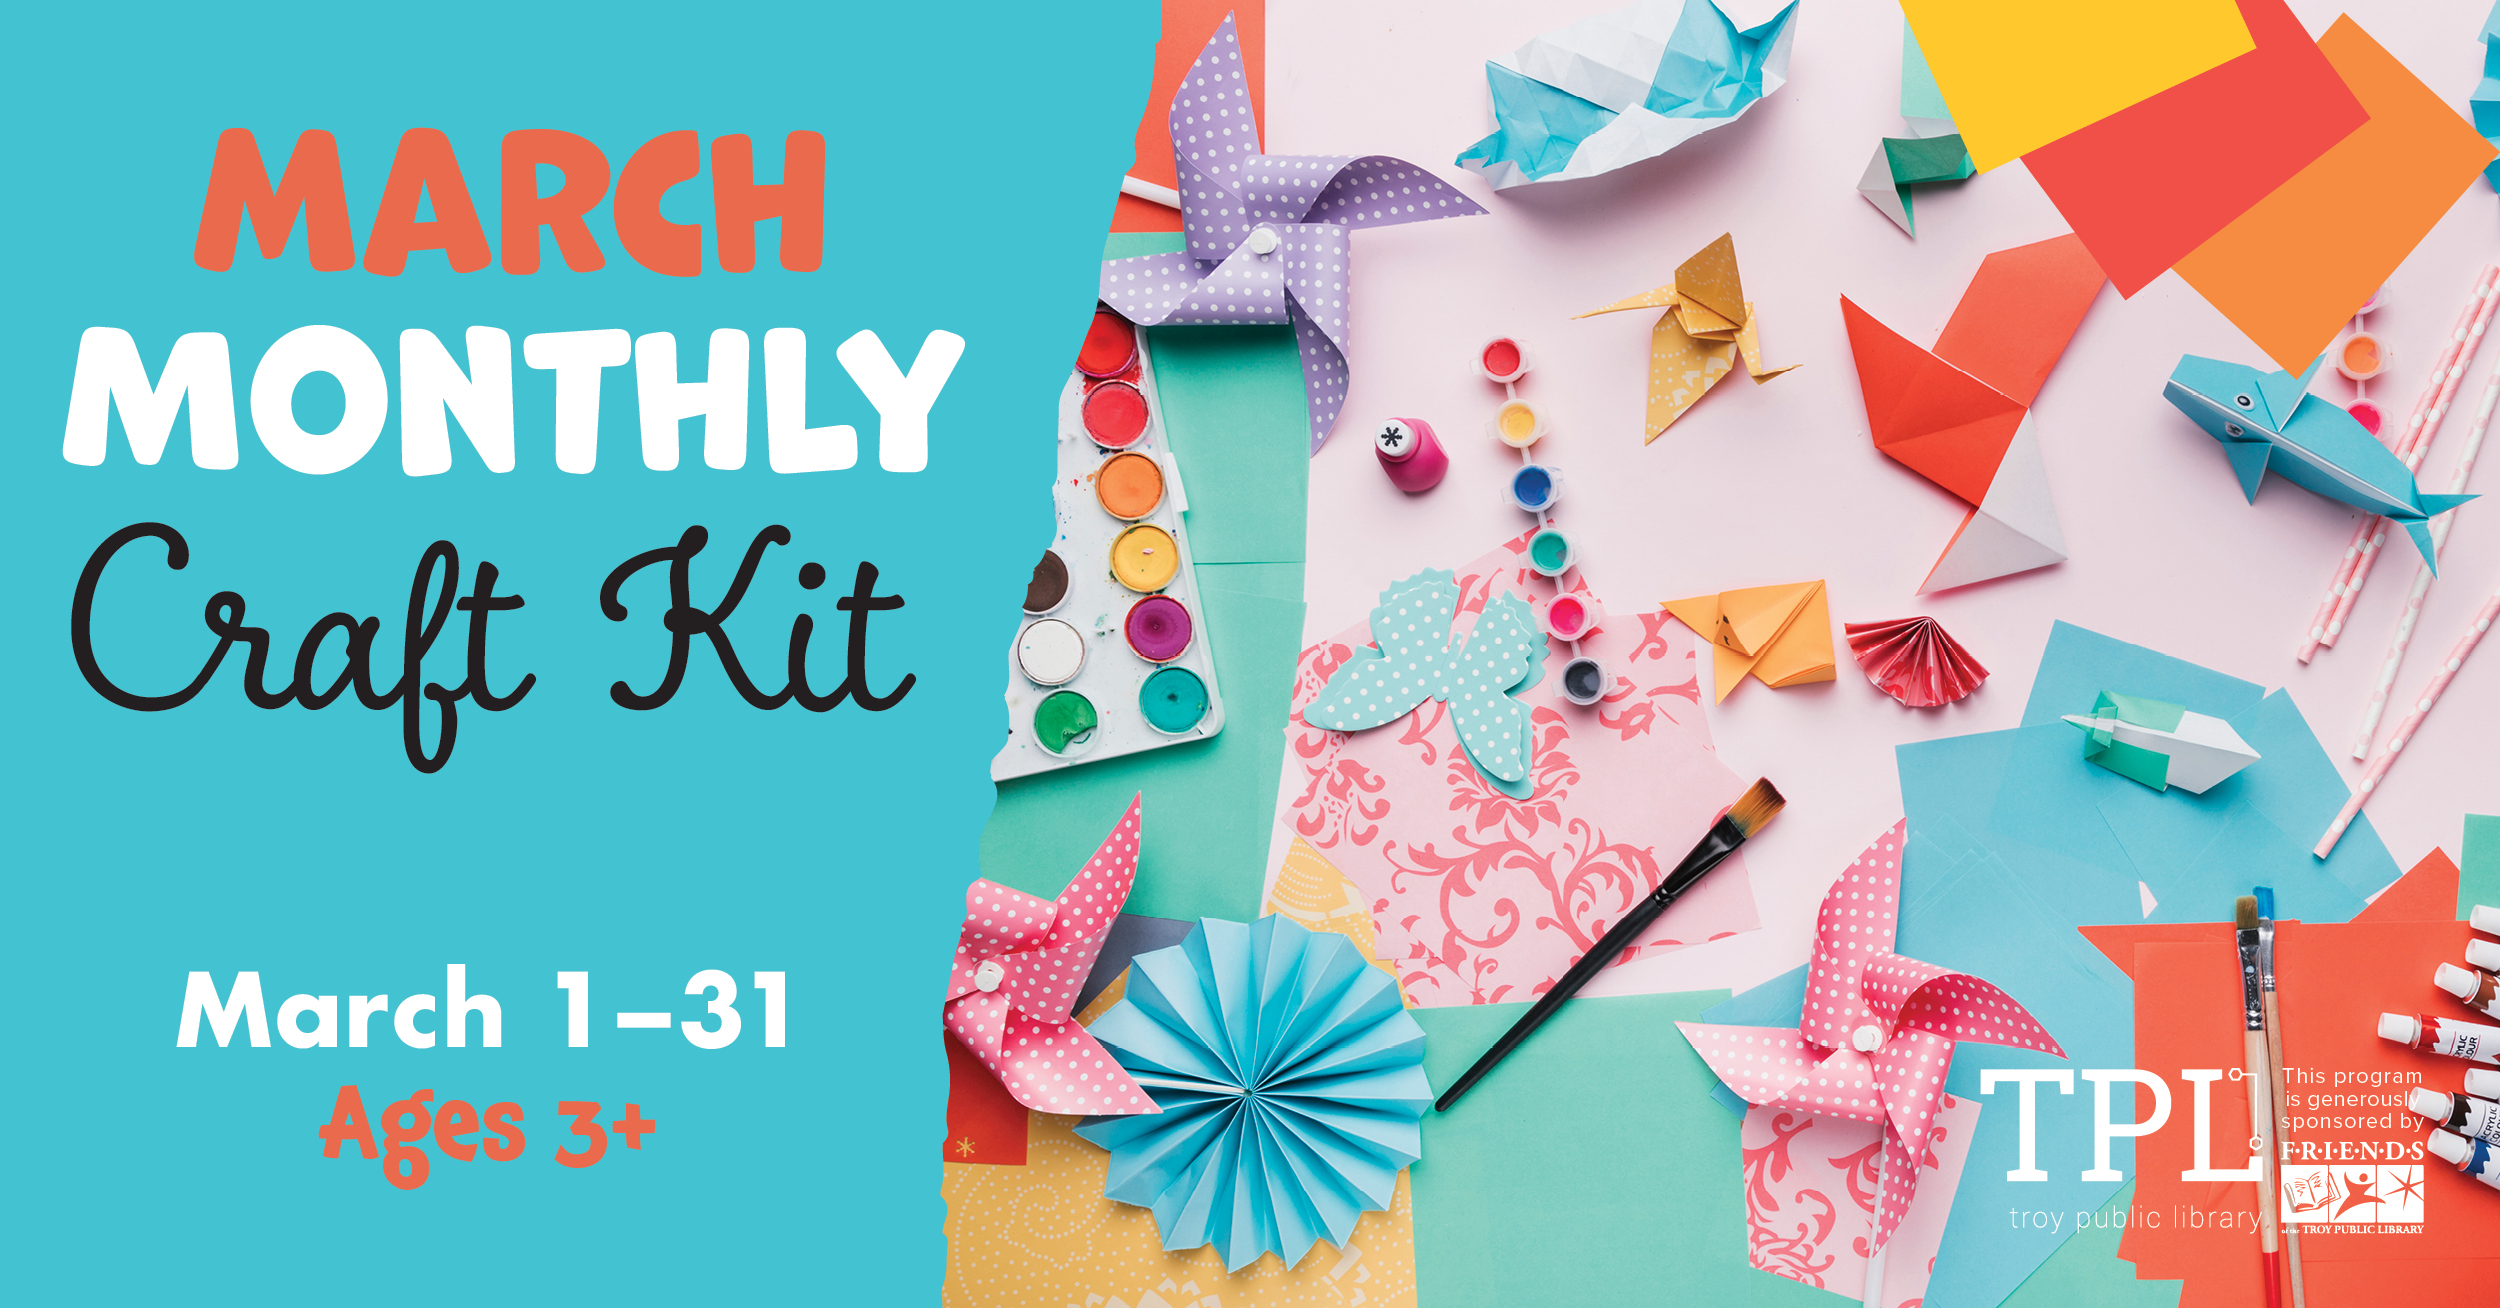 March Monthly Craft Kit March 1-31 Ages 3+. Sponsored by the Friends of the Troy Public Library